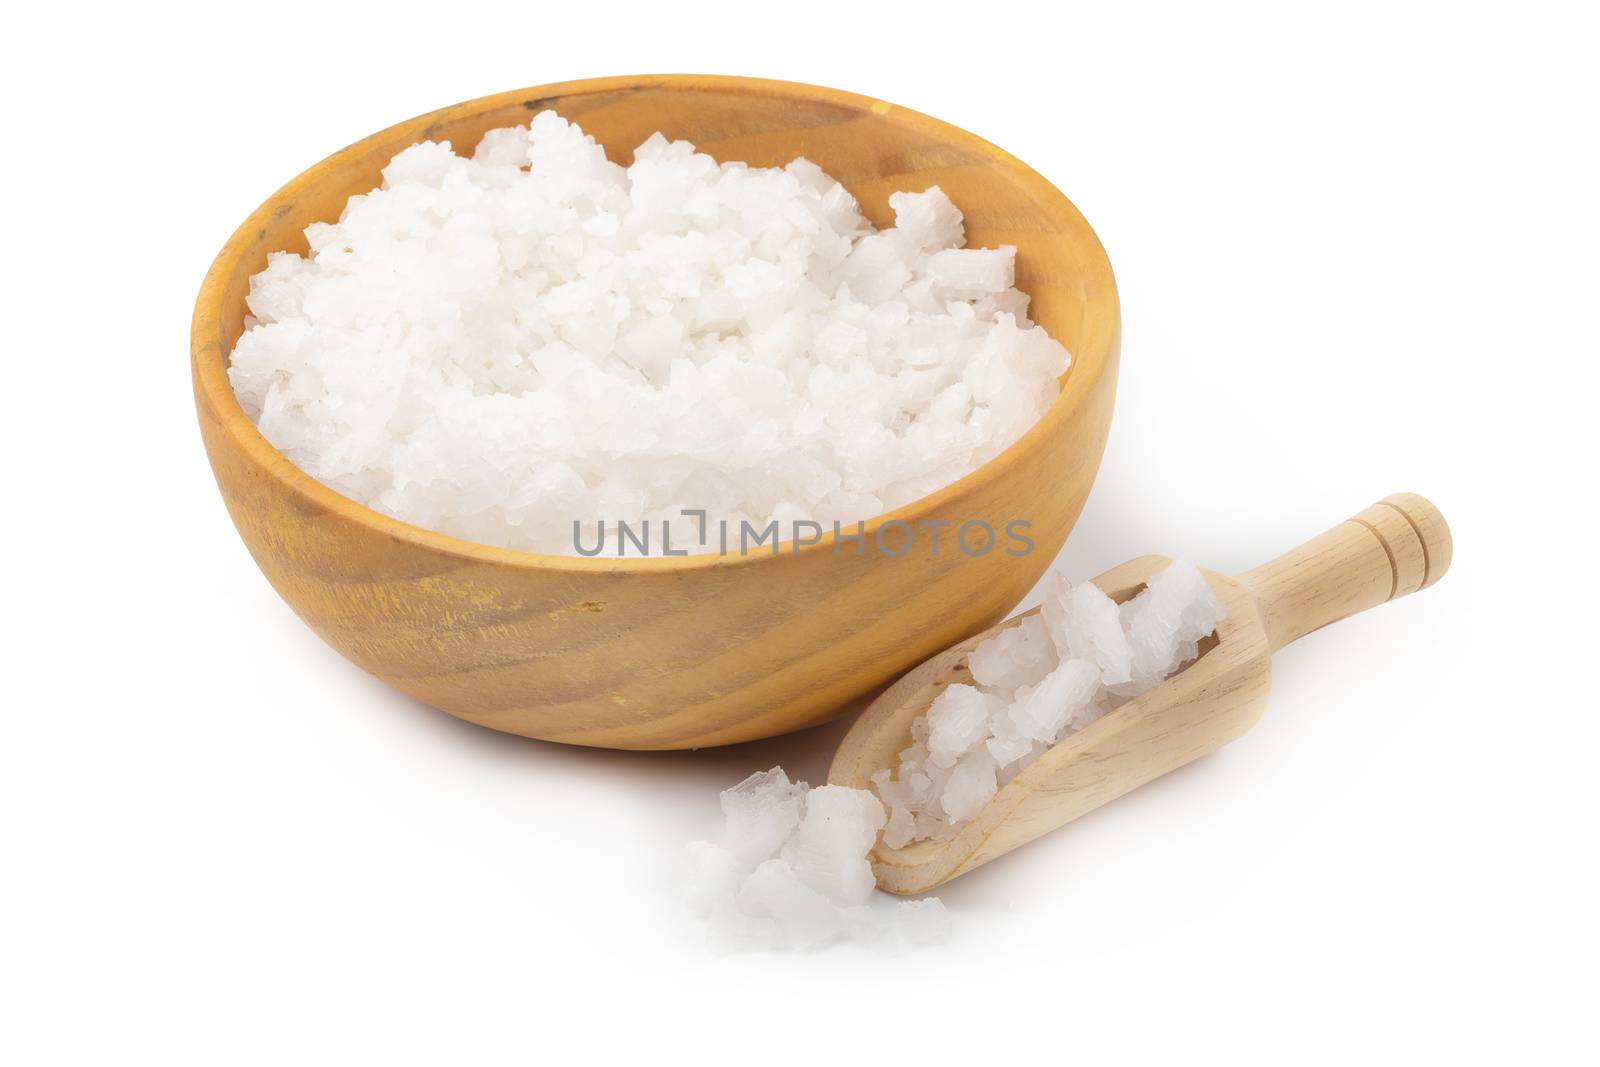 Organic sea white salt tablets in a wooden bowl on white backgro by kaiskynet